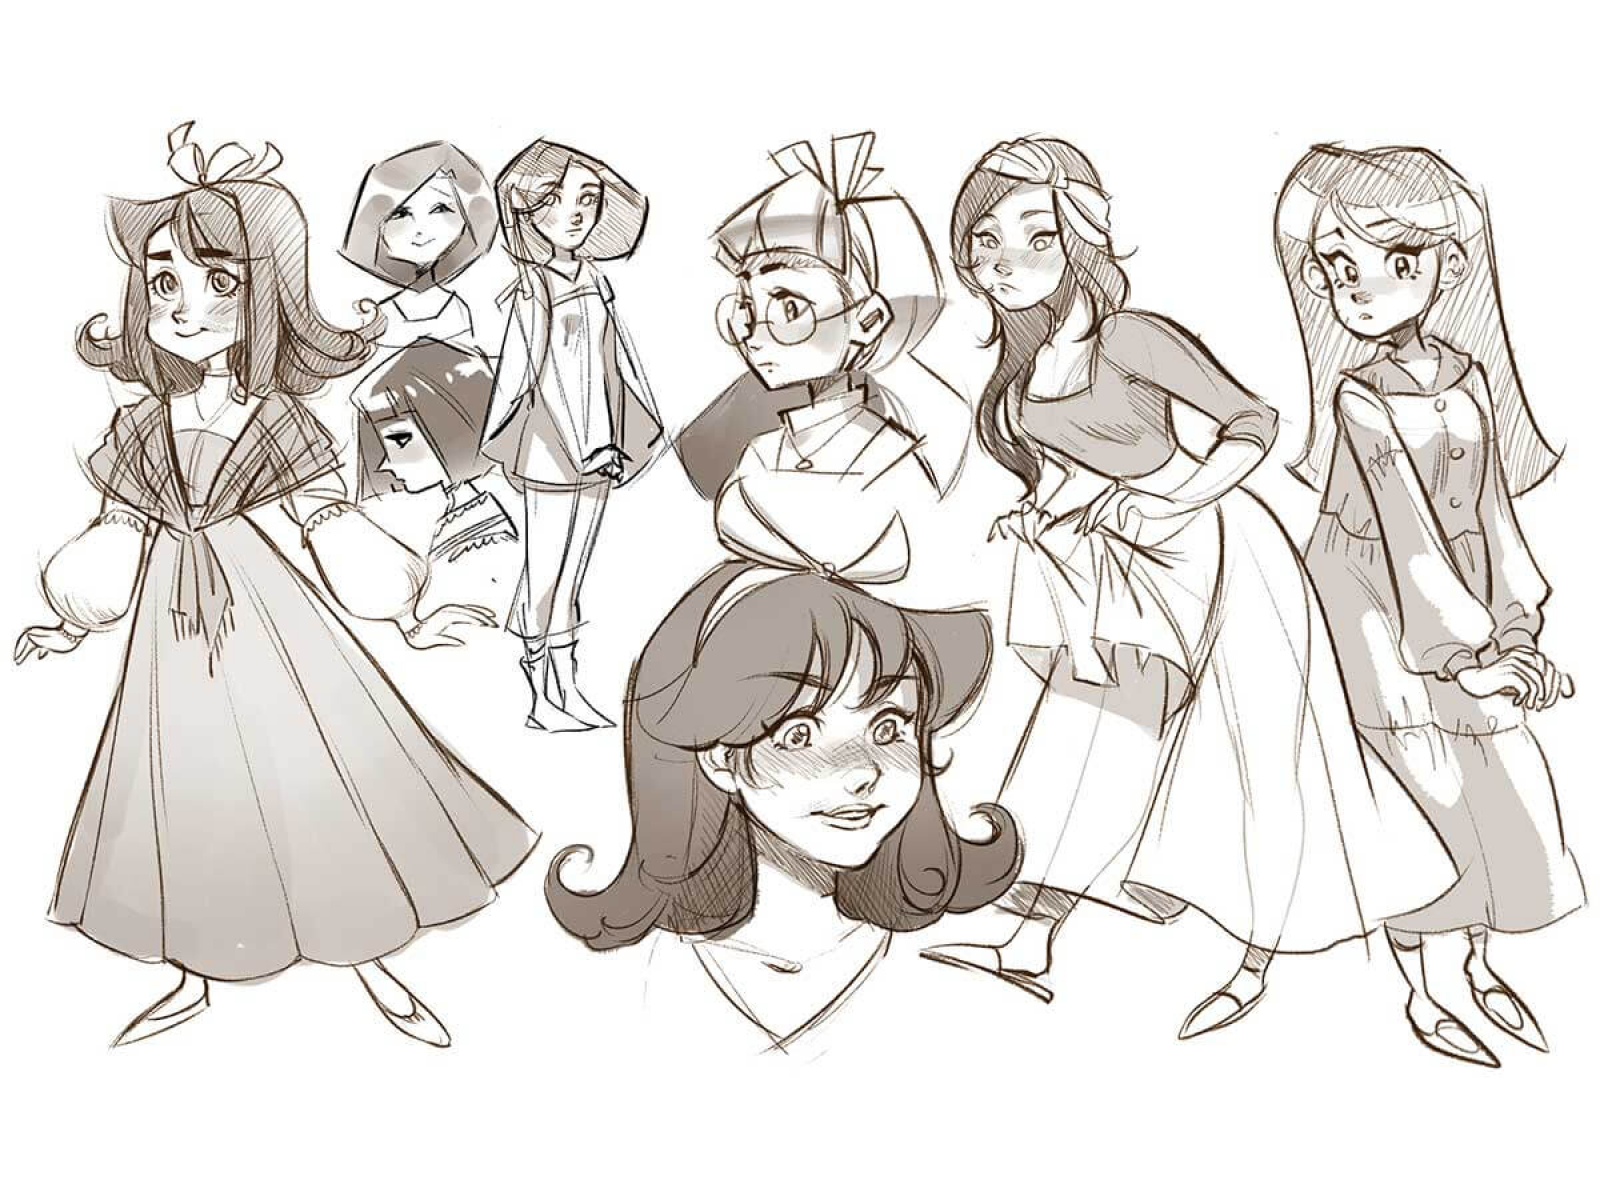 Concept art of several women in various outfits and poses.